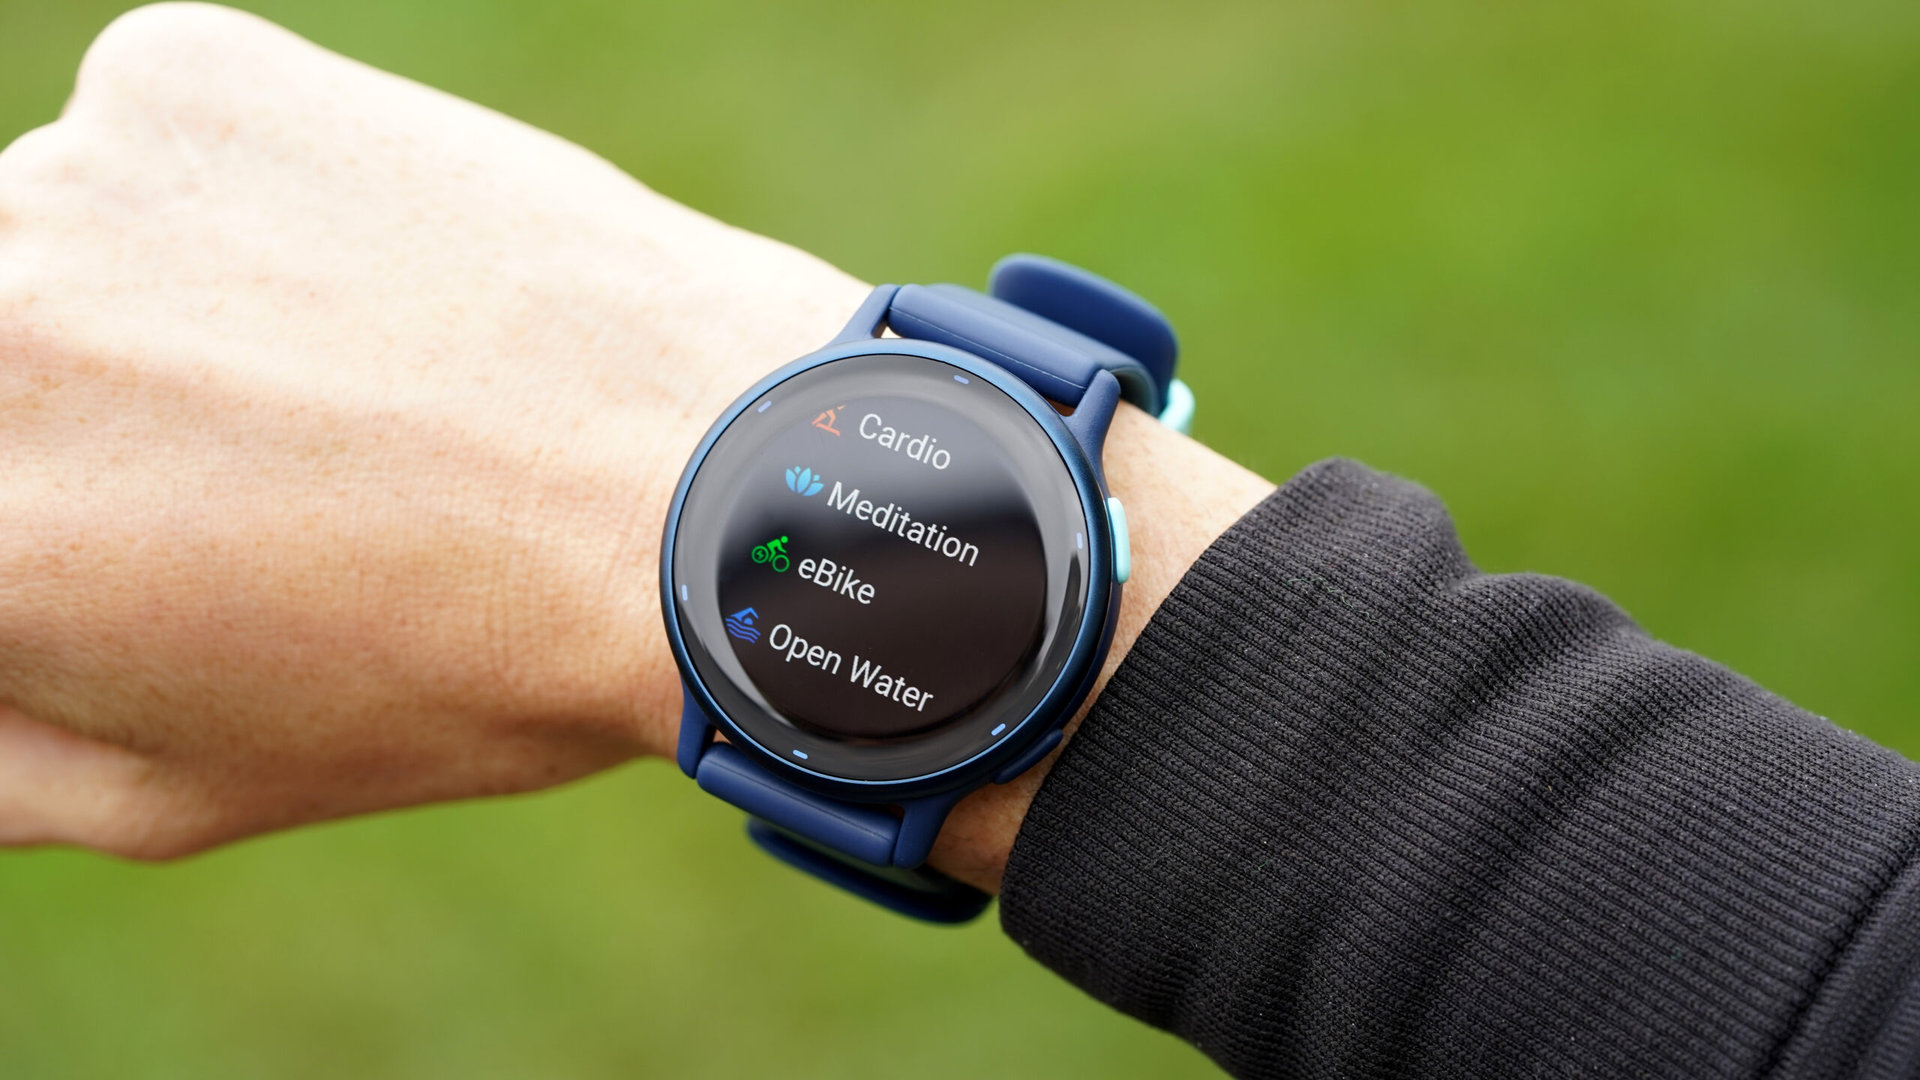 Garmin Vivoactive 5 review: Should you buy it? - Android Authority